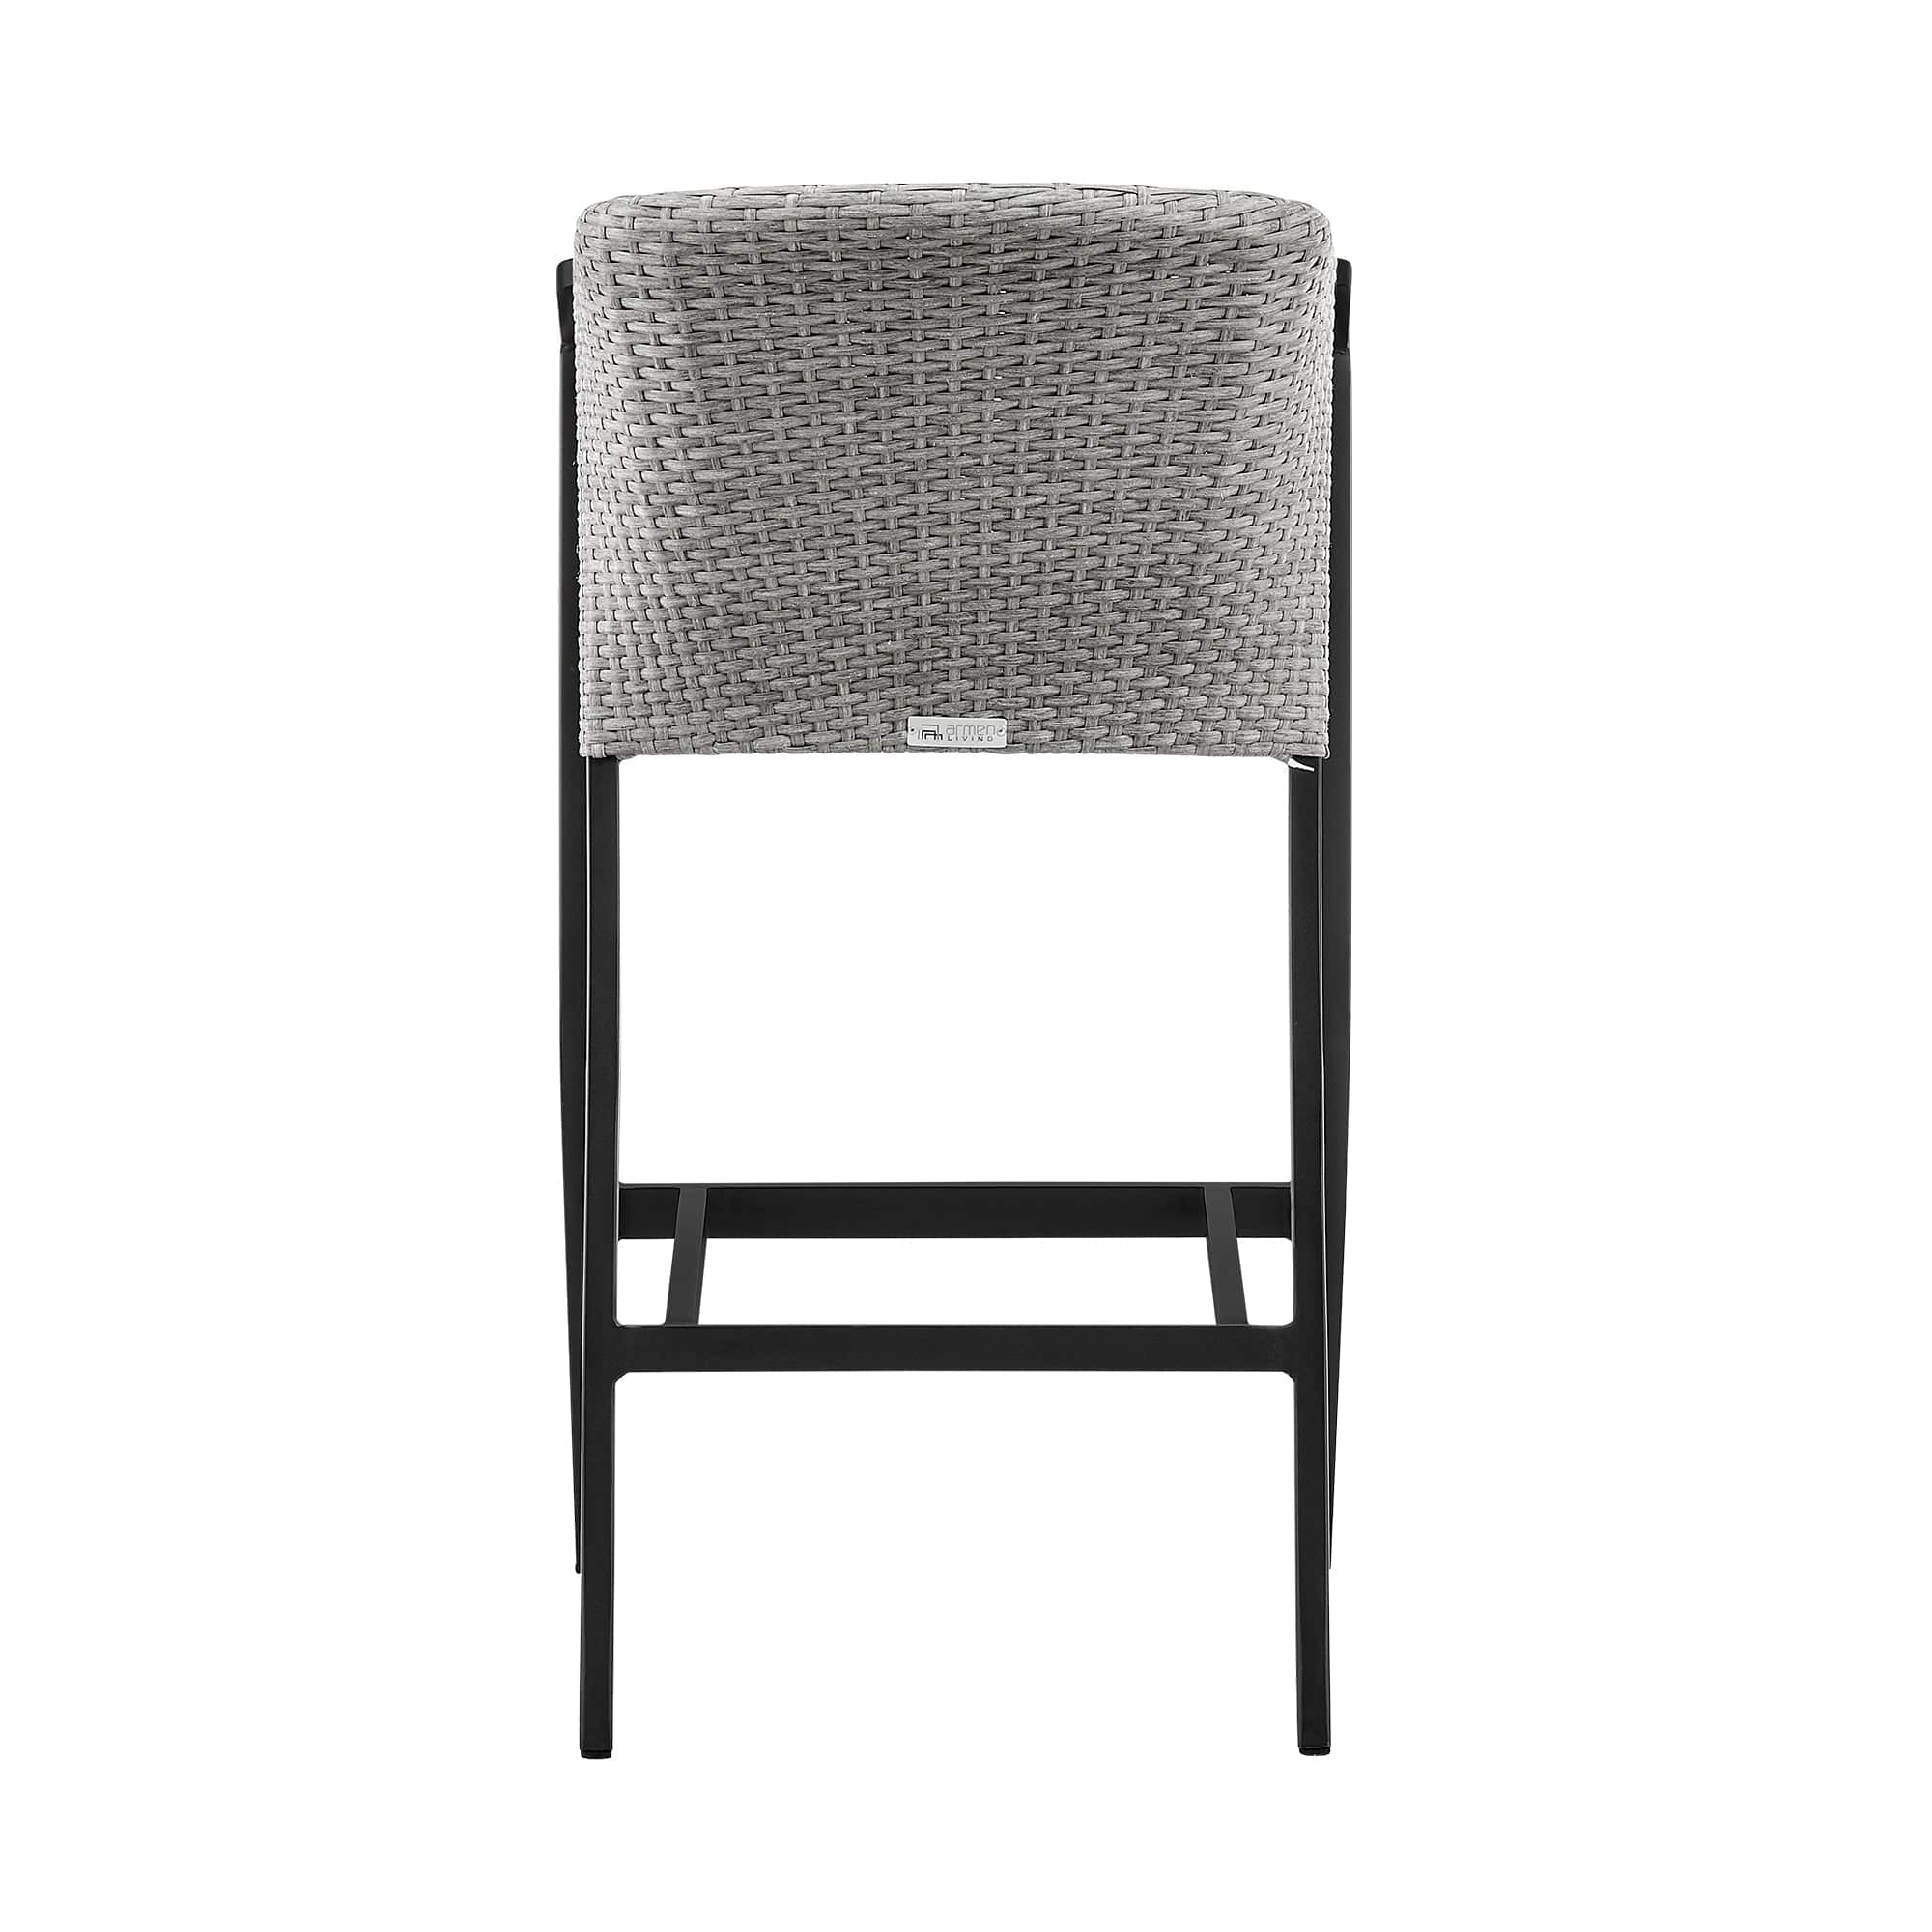 Armen Living Outdoor Bar Stool Armen Living | Palma Outdoor Patio Counter Height Bar Stool in Aluminum and Wicker with Grey Cushions | LCPFBAGR26